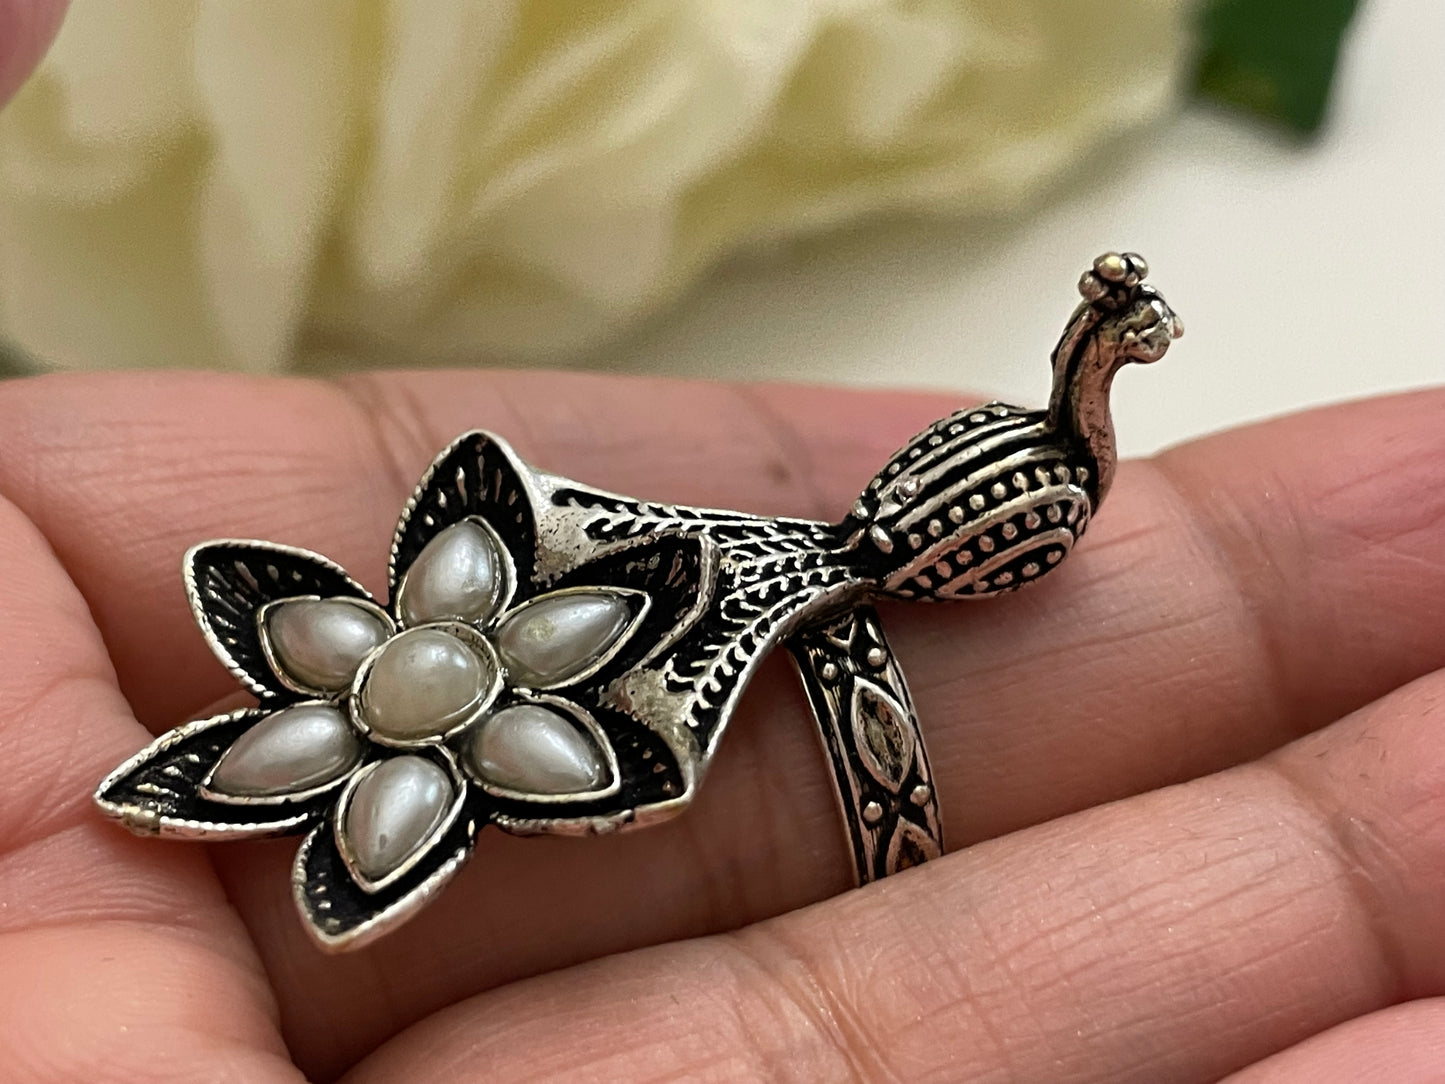 Peacock Ring handcrafted adjustable antique style bohemian jewelry